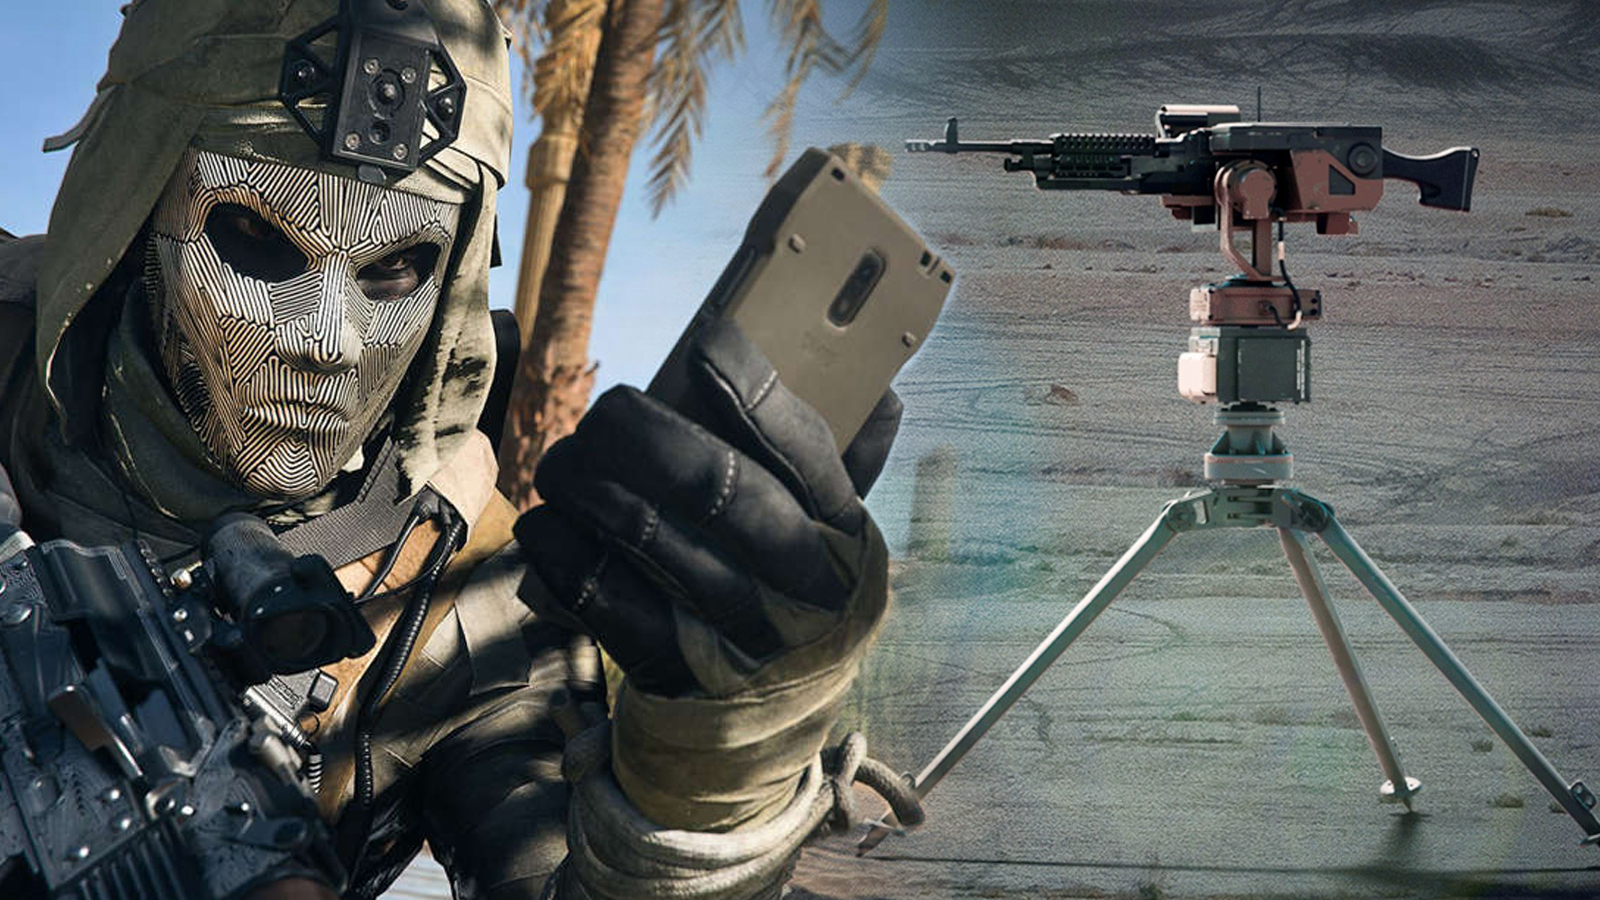 CoD adds Ghost meme sticker in the most 'greedy' way possible